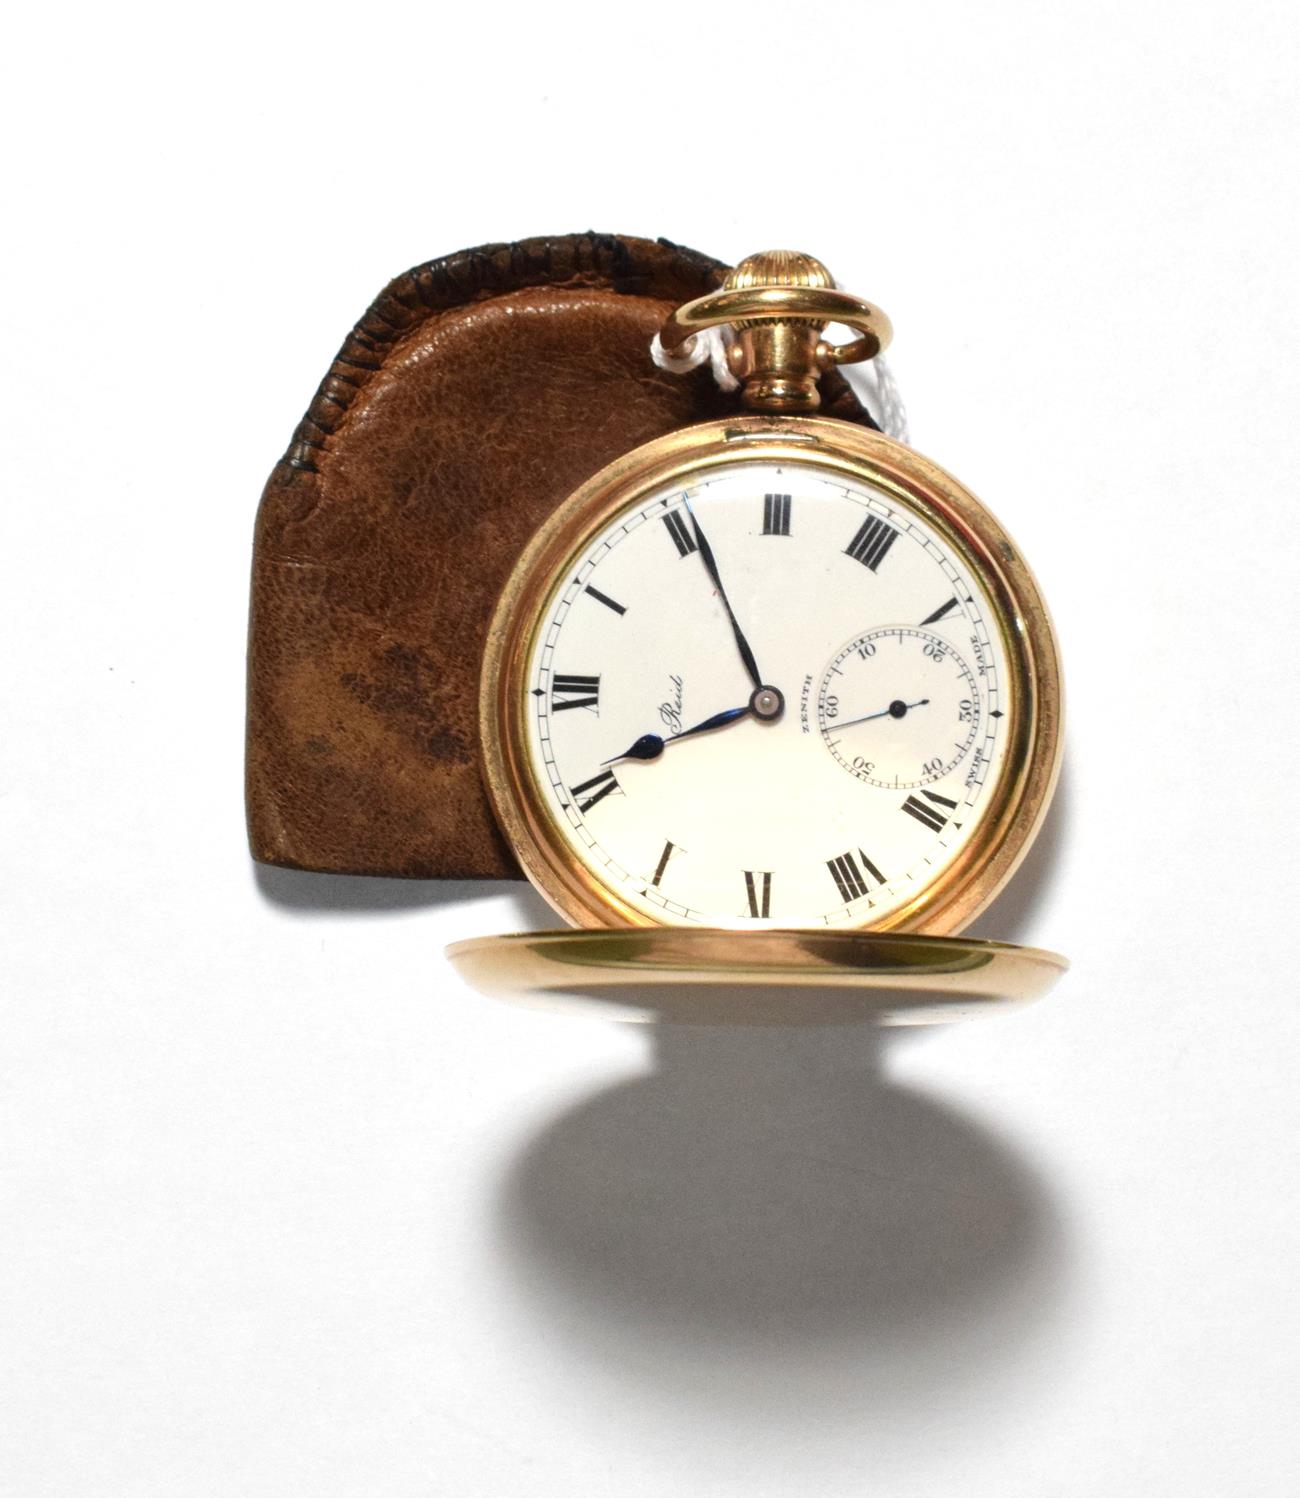 Lot 198 - Reid gold plated pocket watch with Zenith movement, Roman dial with subsidiary second dial